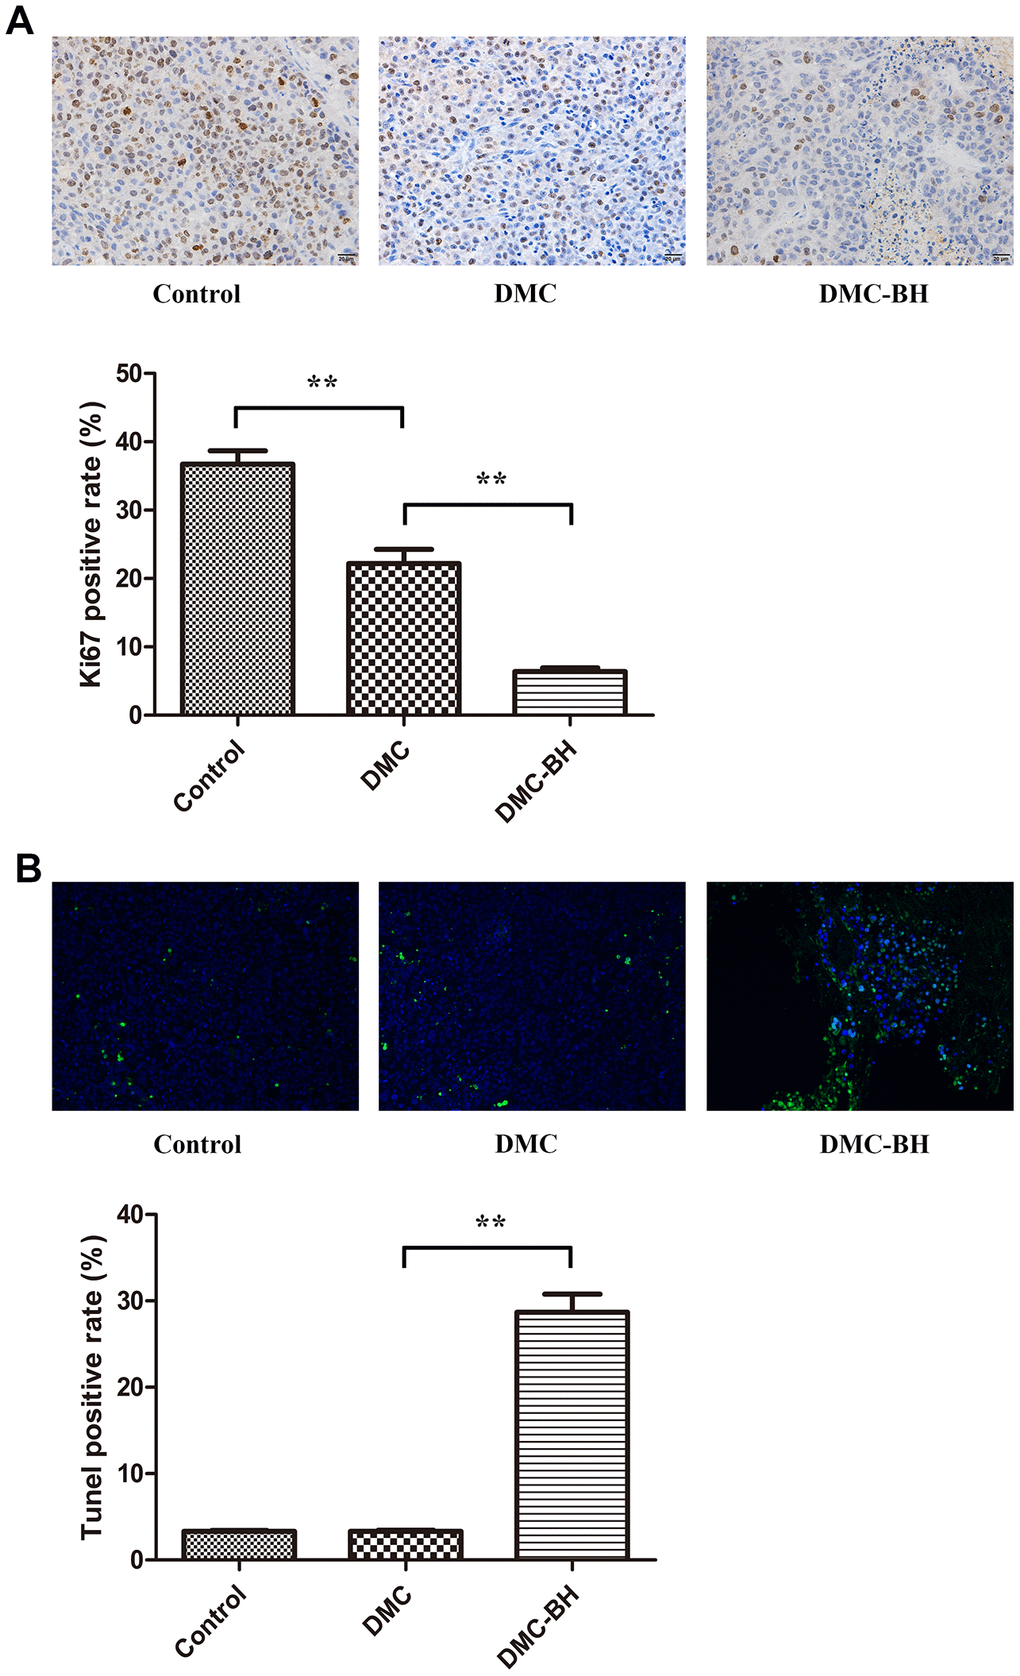 The effects of DMC-BH and DMC on orthotopic glioblastoma growth were analyzed by immunohistochemical staining. (A) The orthotopic glioblastoma growth potential after treatment with 20 mg/kg DMC-BH or DMC treatment was evaluated by Ki67 immunohistochemistry. (B) The orthotopic glioblastoma apoptosis rate after treatment with 20 mg/kg DMC-BH or DMC was analyzed by TUNEL staining.